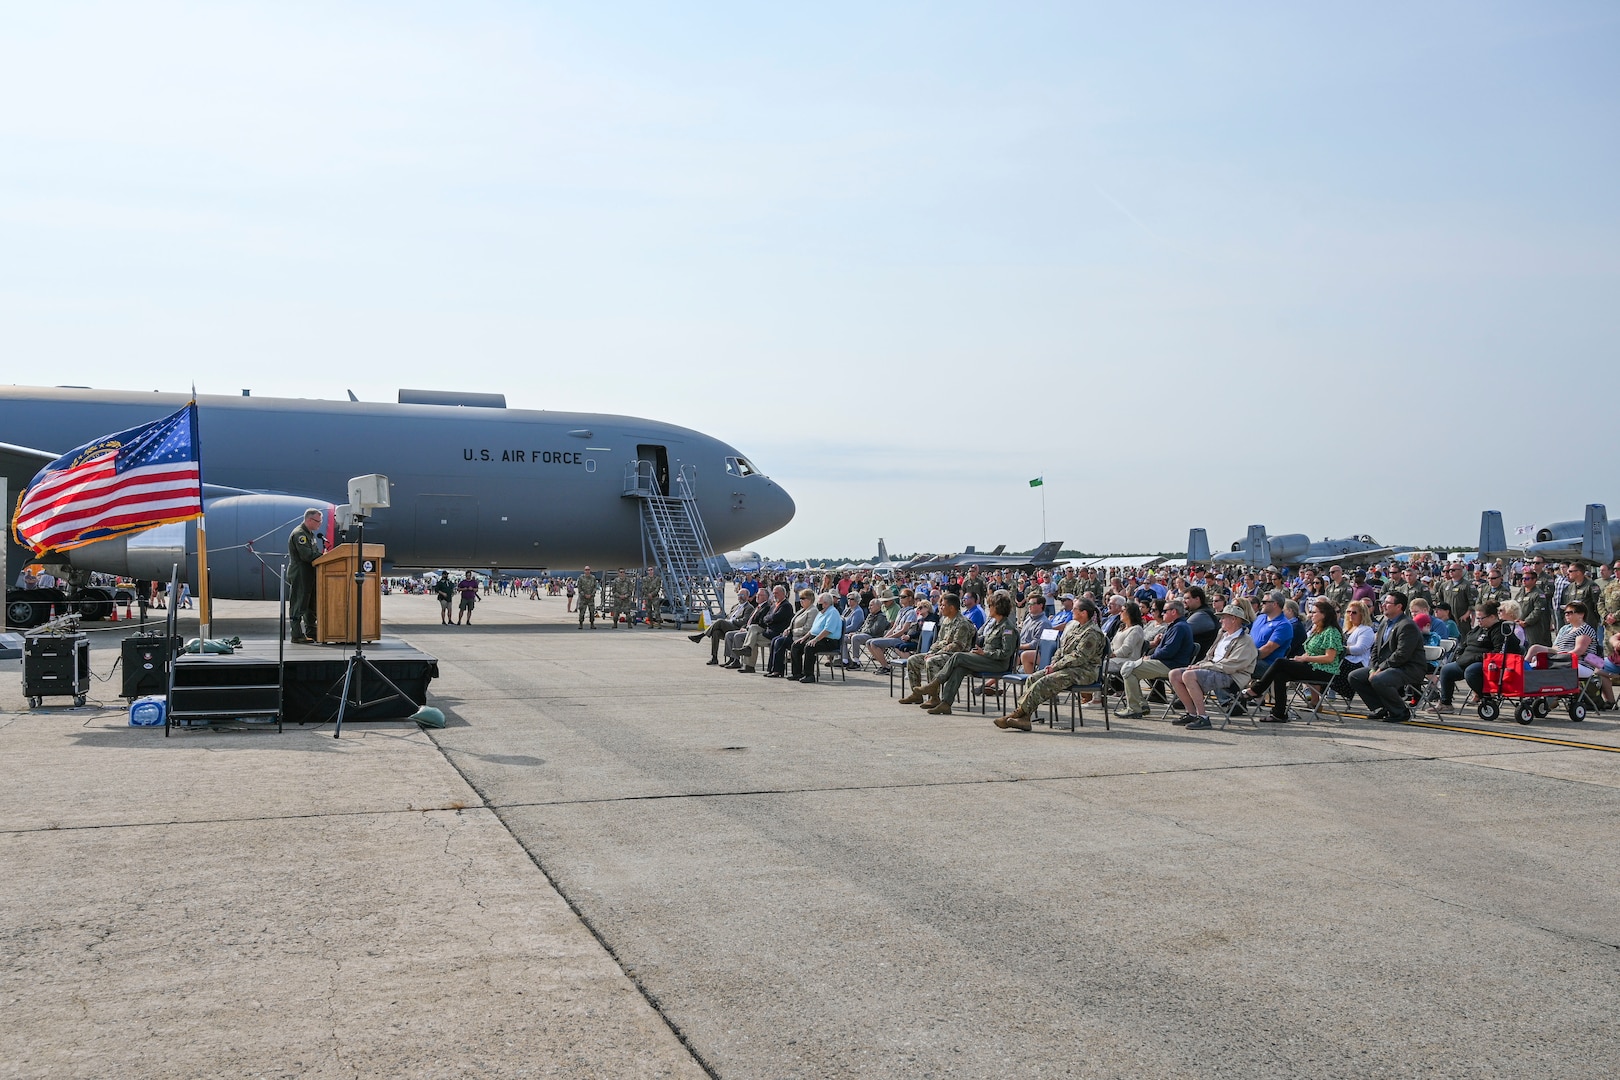 The 157th Air Refueling Wing names their 12 new KC-46 aircraft in honor of the 10 counties of New Hampshire and the two towns adjacent to the base, at Pease Air National Guard Base, New Hampshire, Sept. 12, 2021.